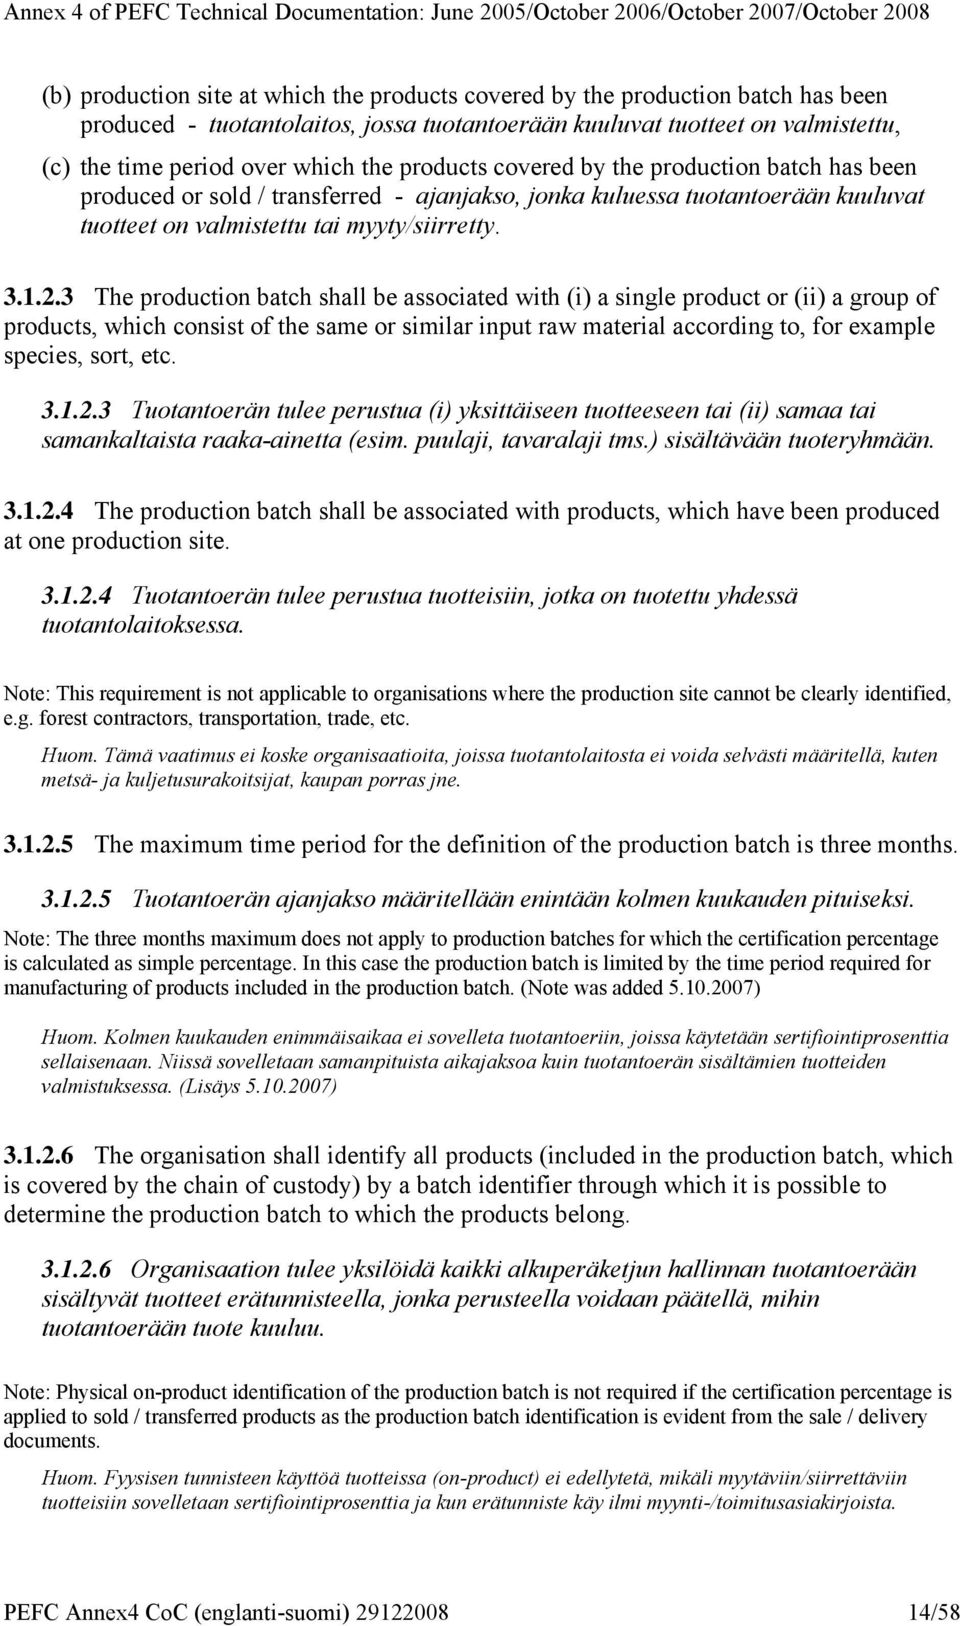 3 The production batch shall be associated with (i) a single product or (ii) a group of products, which consist of the same or similar input raw material according to, for example species, sort, etc.